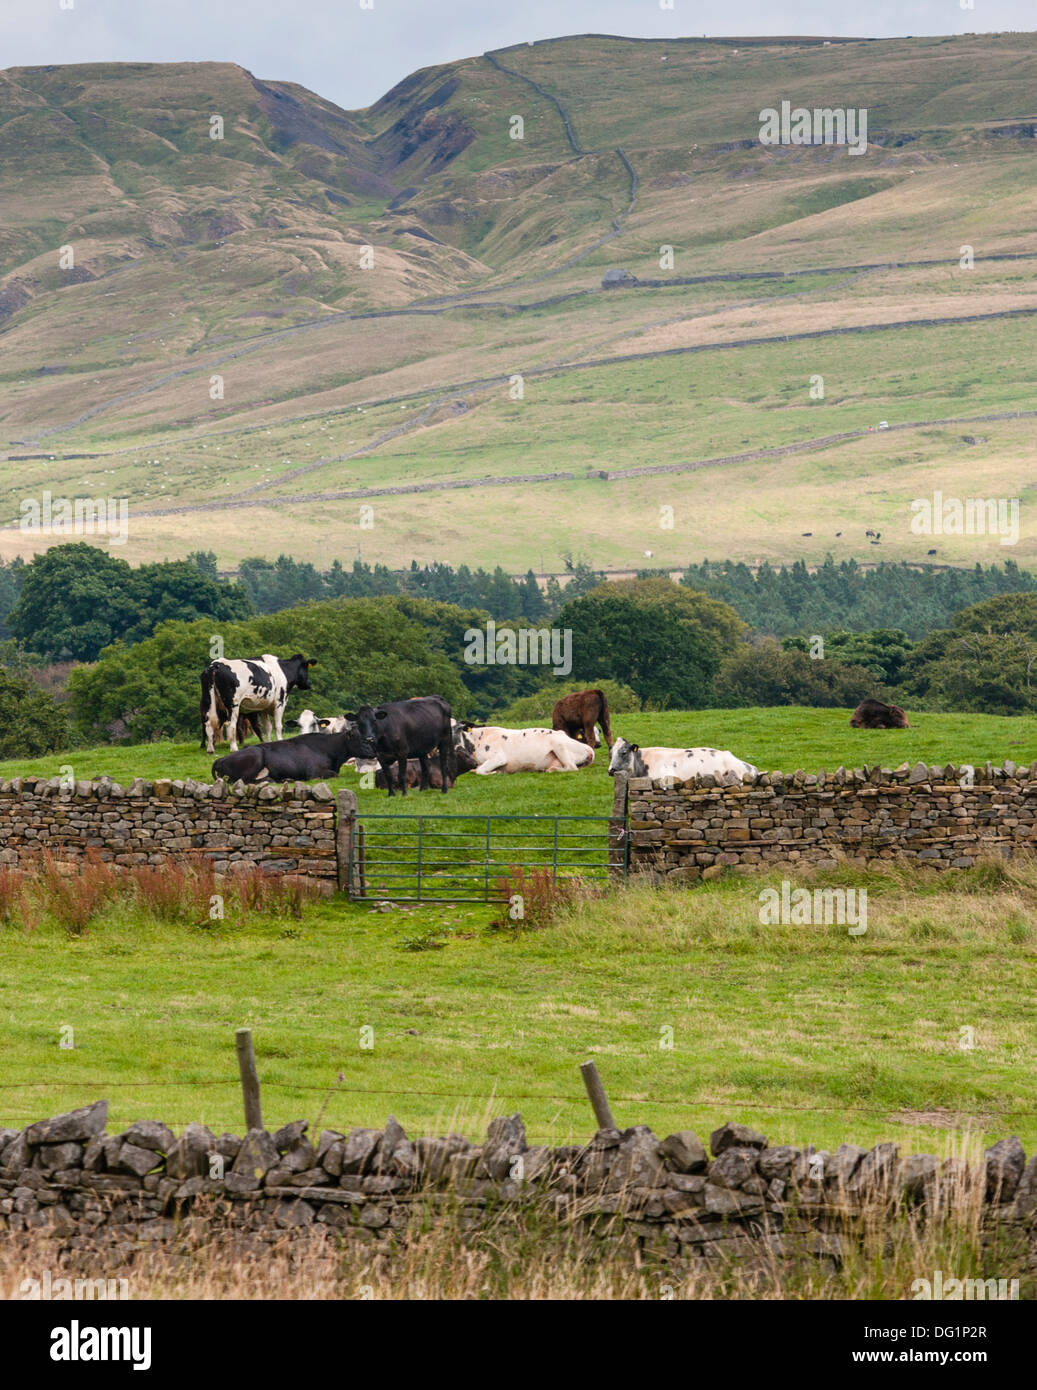 Cattle in country pasture, with drystone walls in foreground and hills in background. Stock Photo